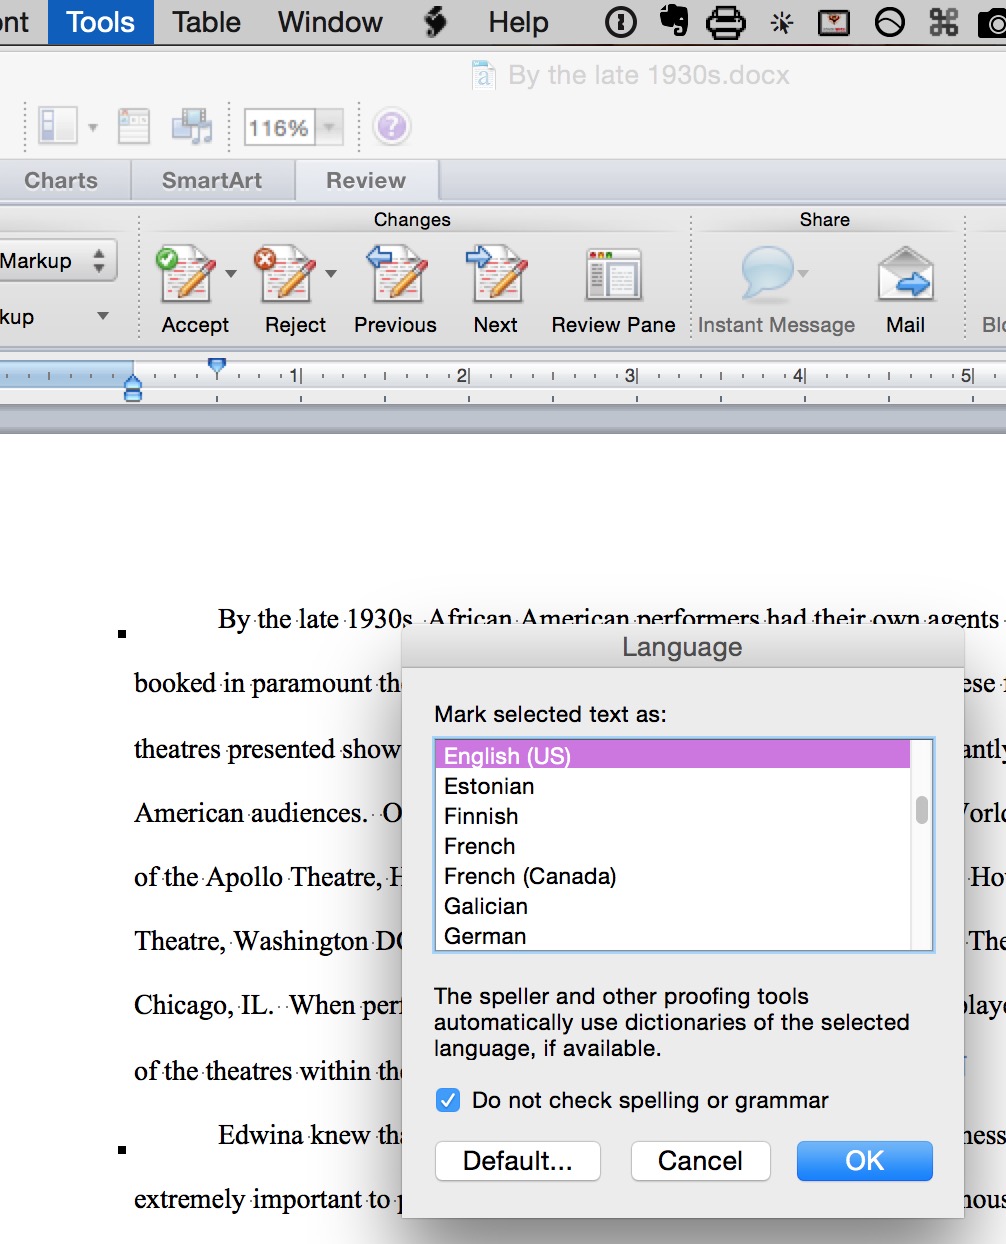 microsoft word for mac says everything is mispelled